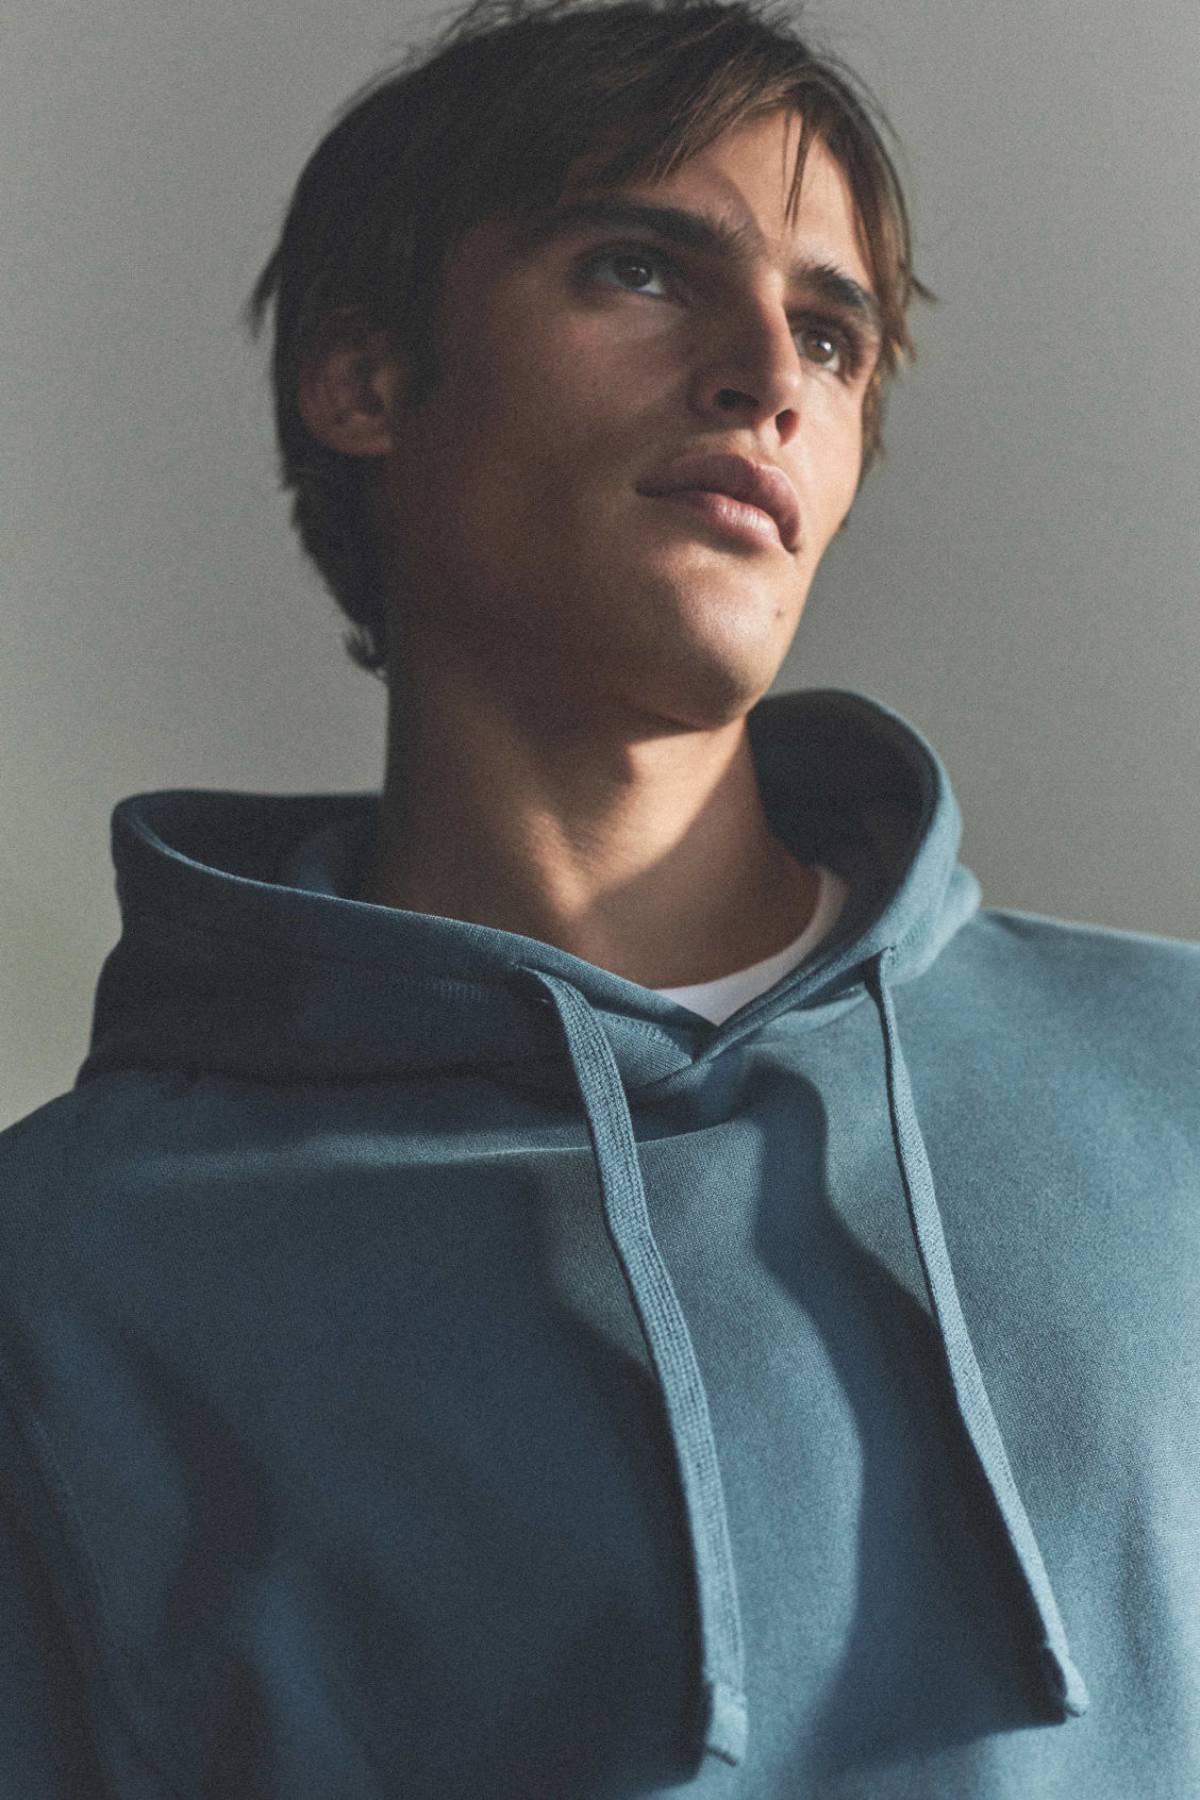 Parker Van Noord by Annemarieke Van Drimmelen for Pause by COS Fall-Winter 2021 Ad Campaign. Clothing: COS TEAL RELAXED-FIT HOODIE / COS WHITE REGULAR-FIT T-SHIRT / COS TEAL RELAXED-FIT TWILL TAPERED PANTS